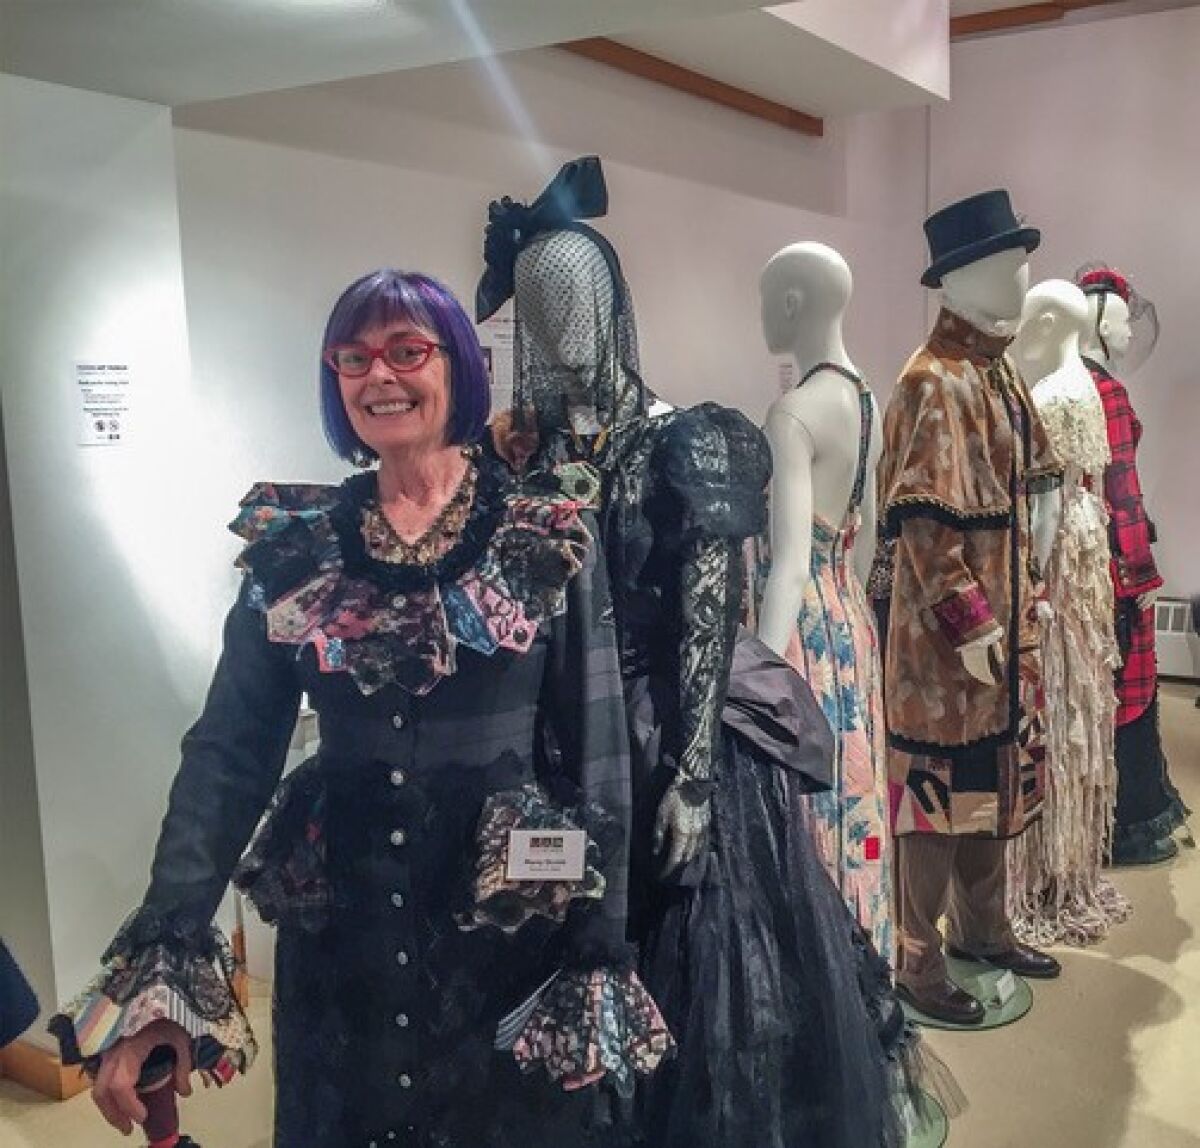 At the Oct. 19 opening, fiber artist Marty Ornish poses with a lineup of some of her up-cycled fashions in ‘Stories in Cloth.’